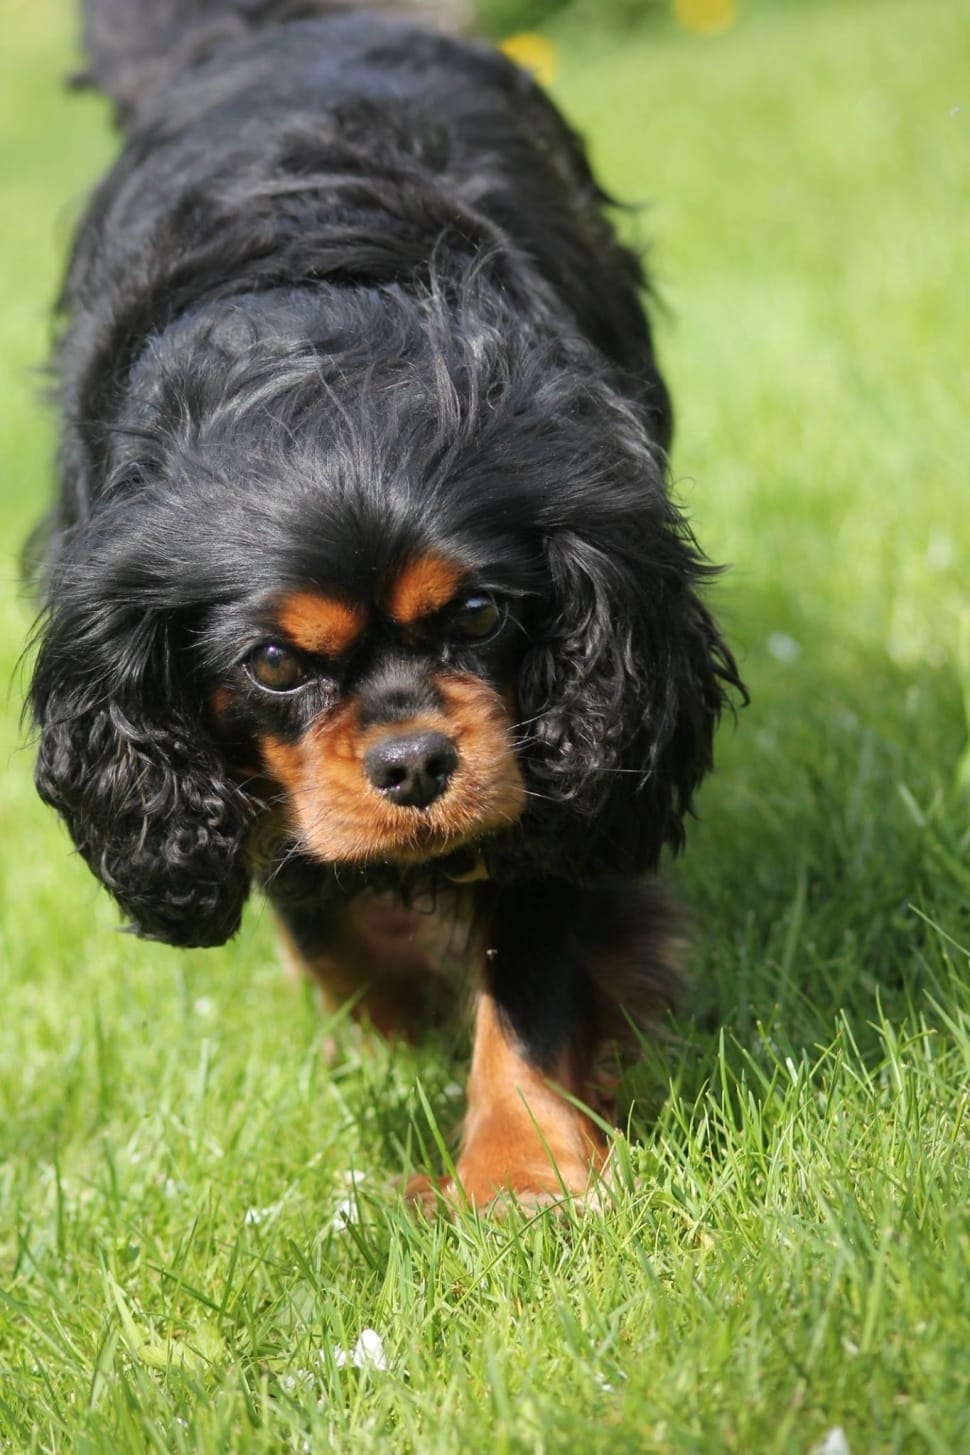 Black And Tan English Toy Spaniel Preview - Cute Dog King Charles Cavalier - HD Wallpaper 